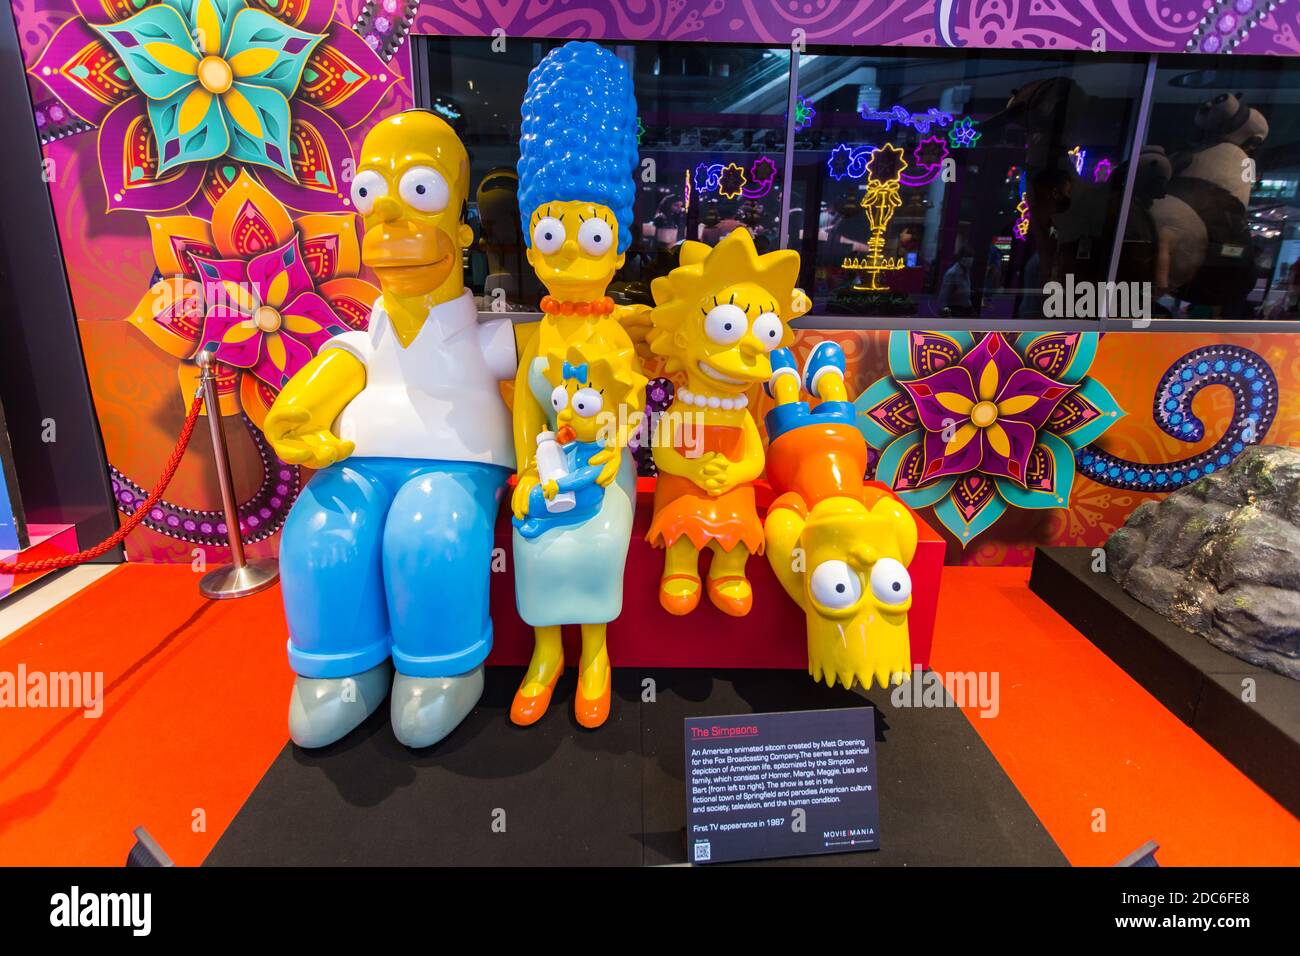 The Simpsons family life-size statues. American family. Stock Photo